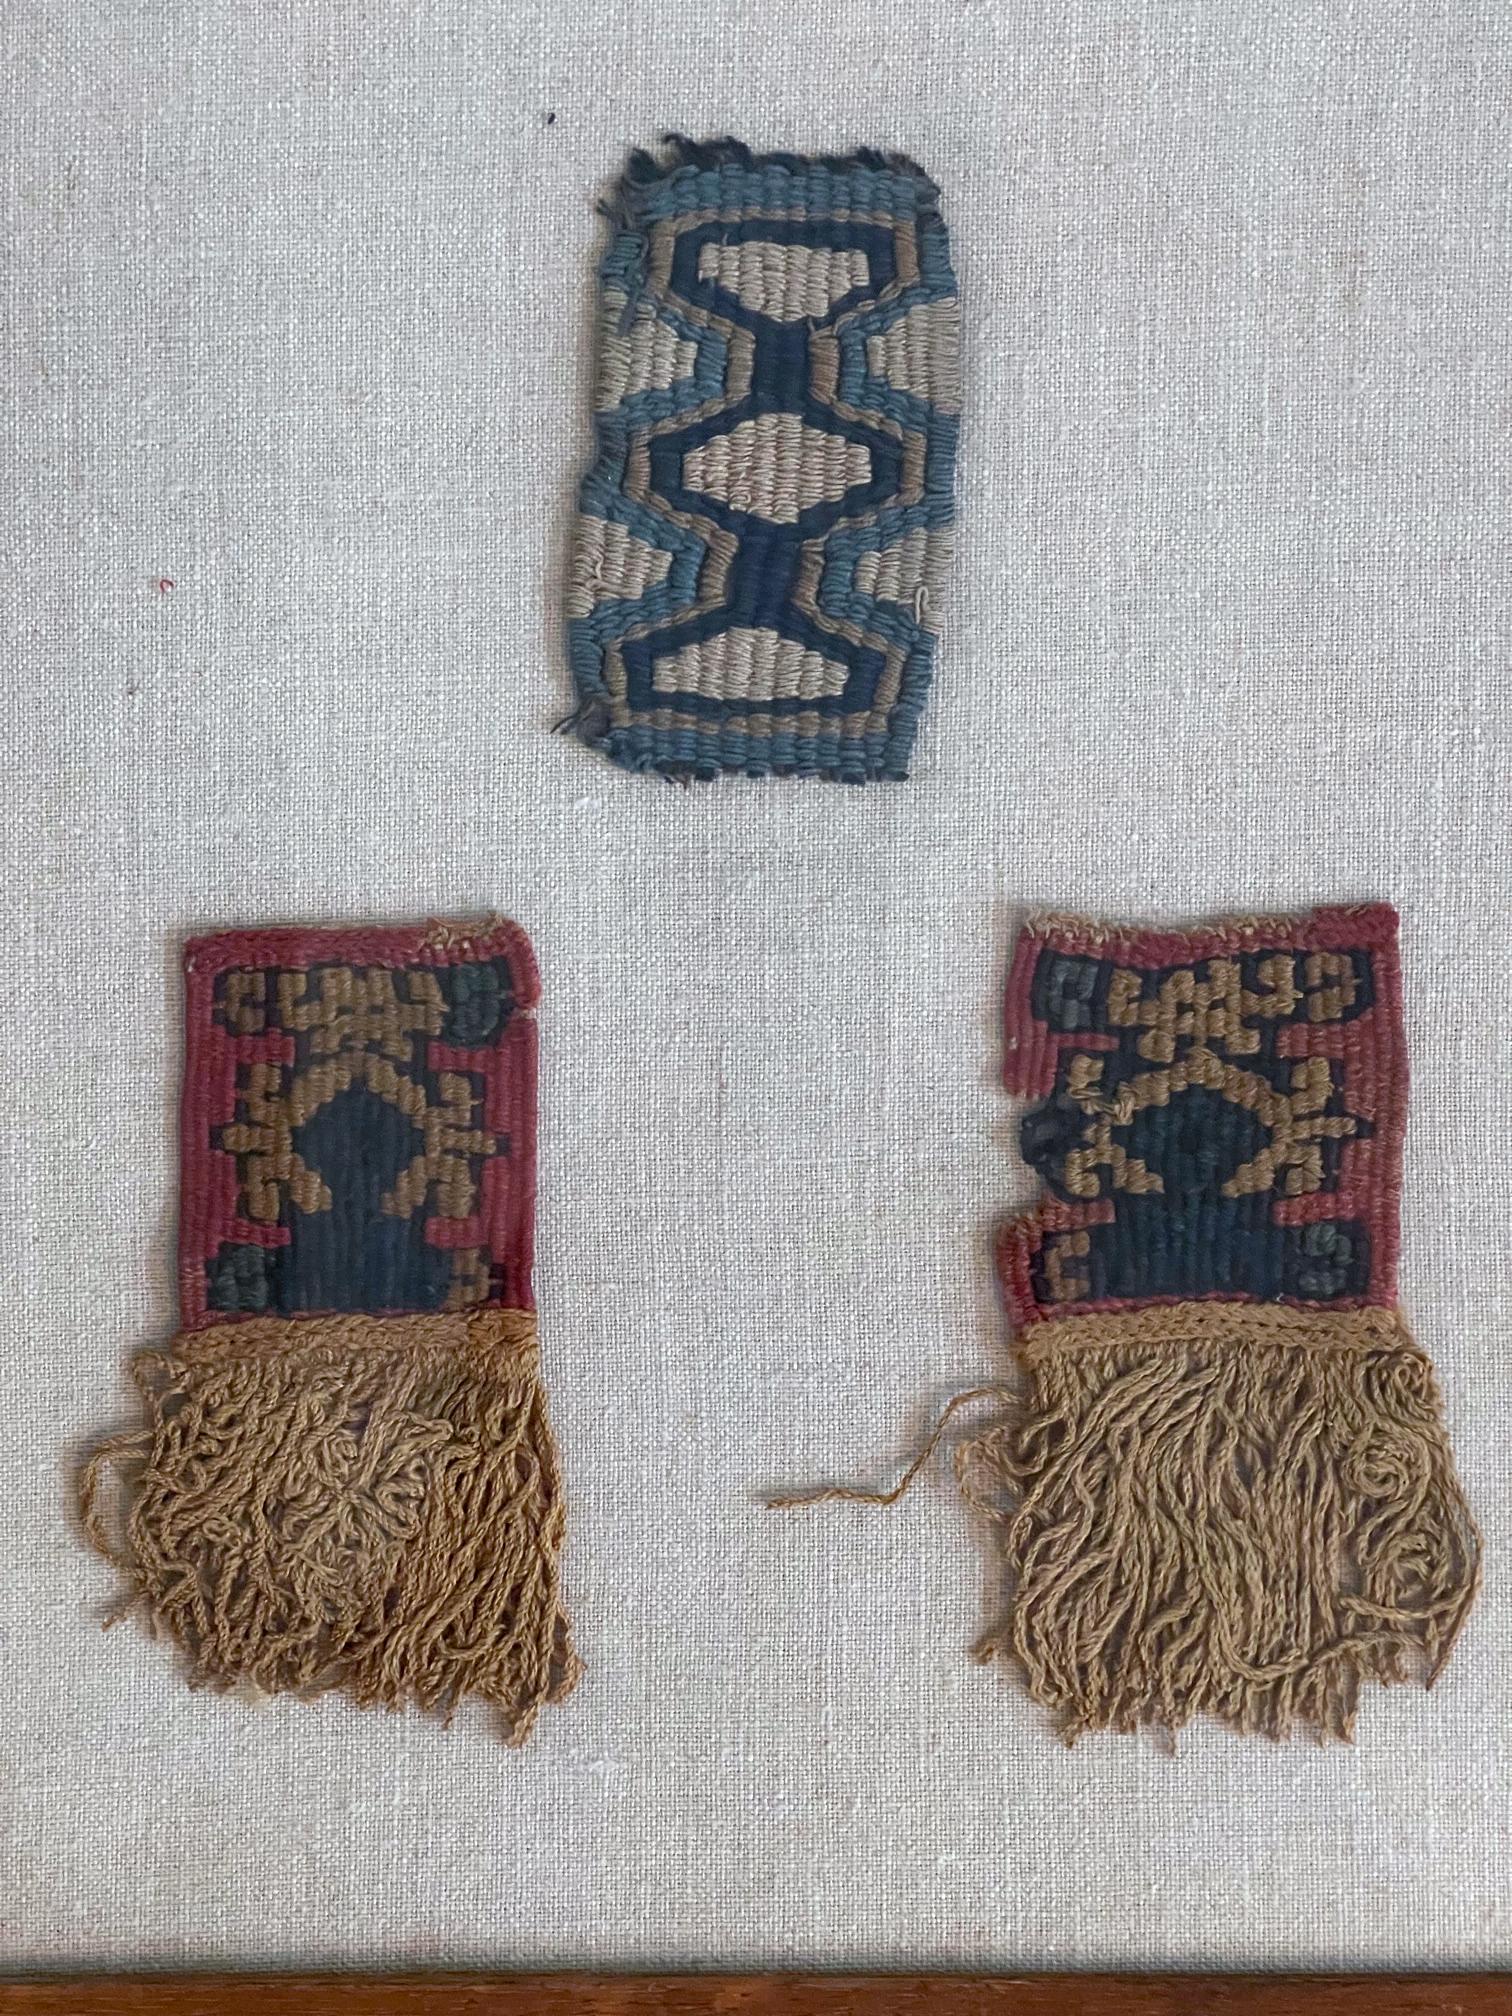 Hand-Woven Two Frame Pre-Columbian Woven Textile Fragments Inca Culture Peru For Sale